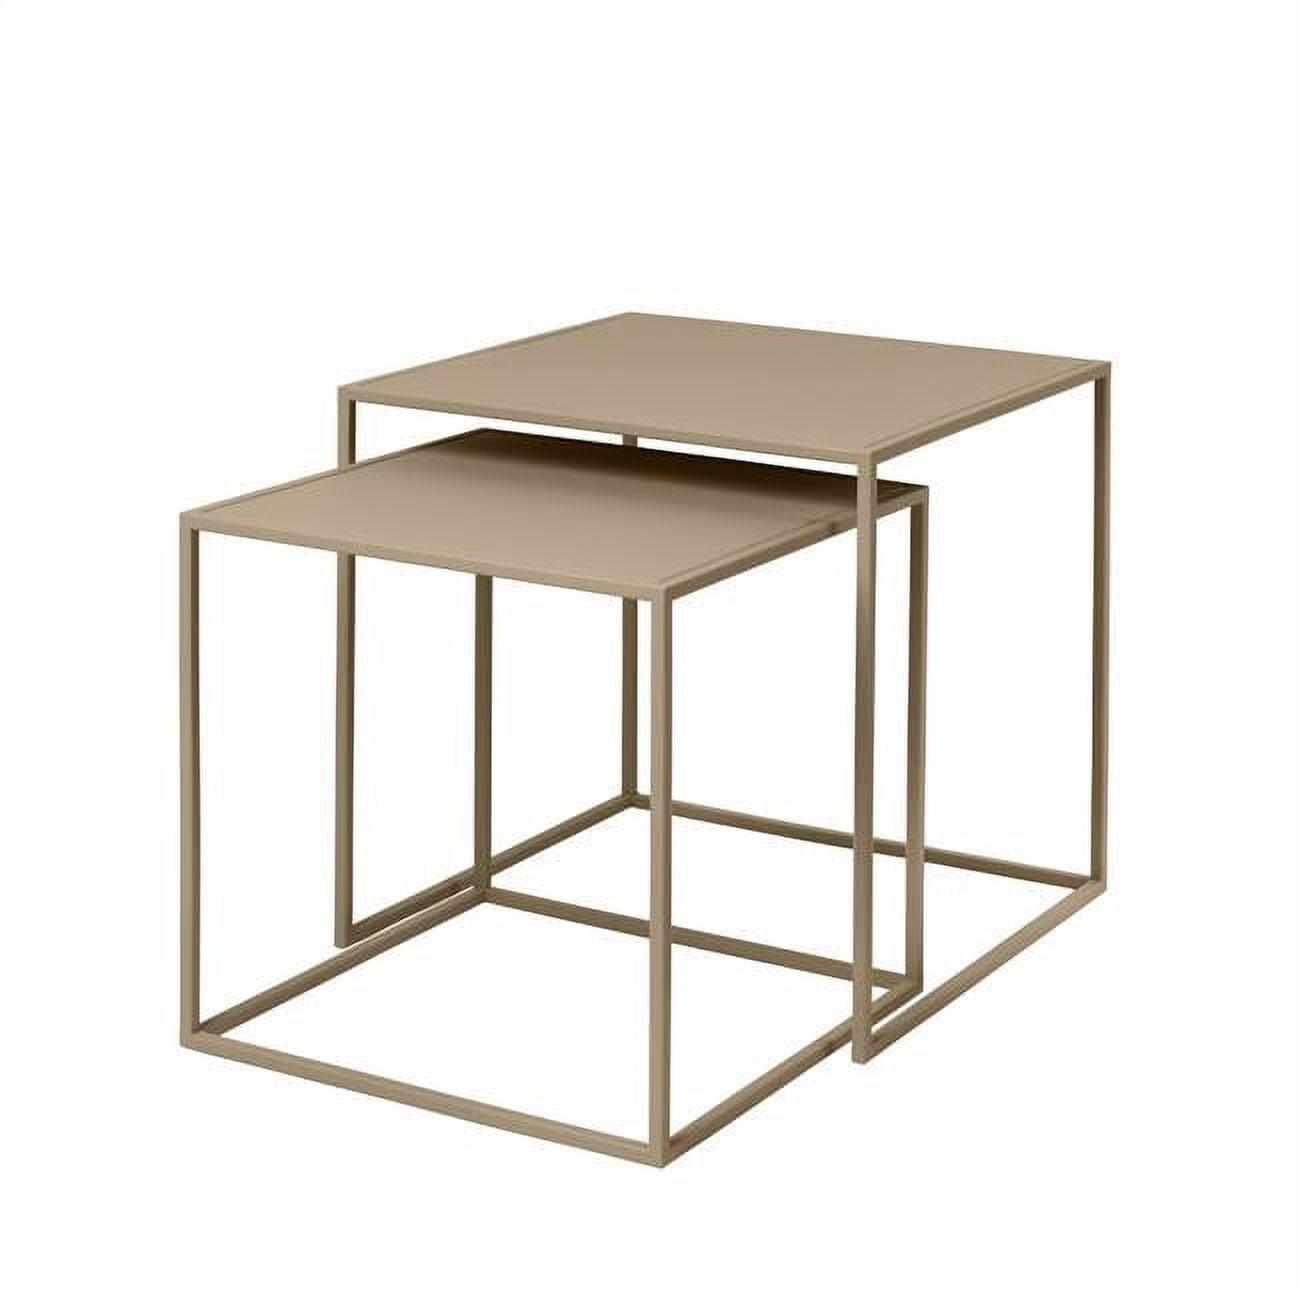 Nomad Square Powder-Coated Steel Nesting End Tables, Set of 2